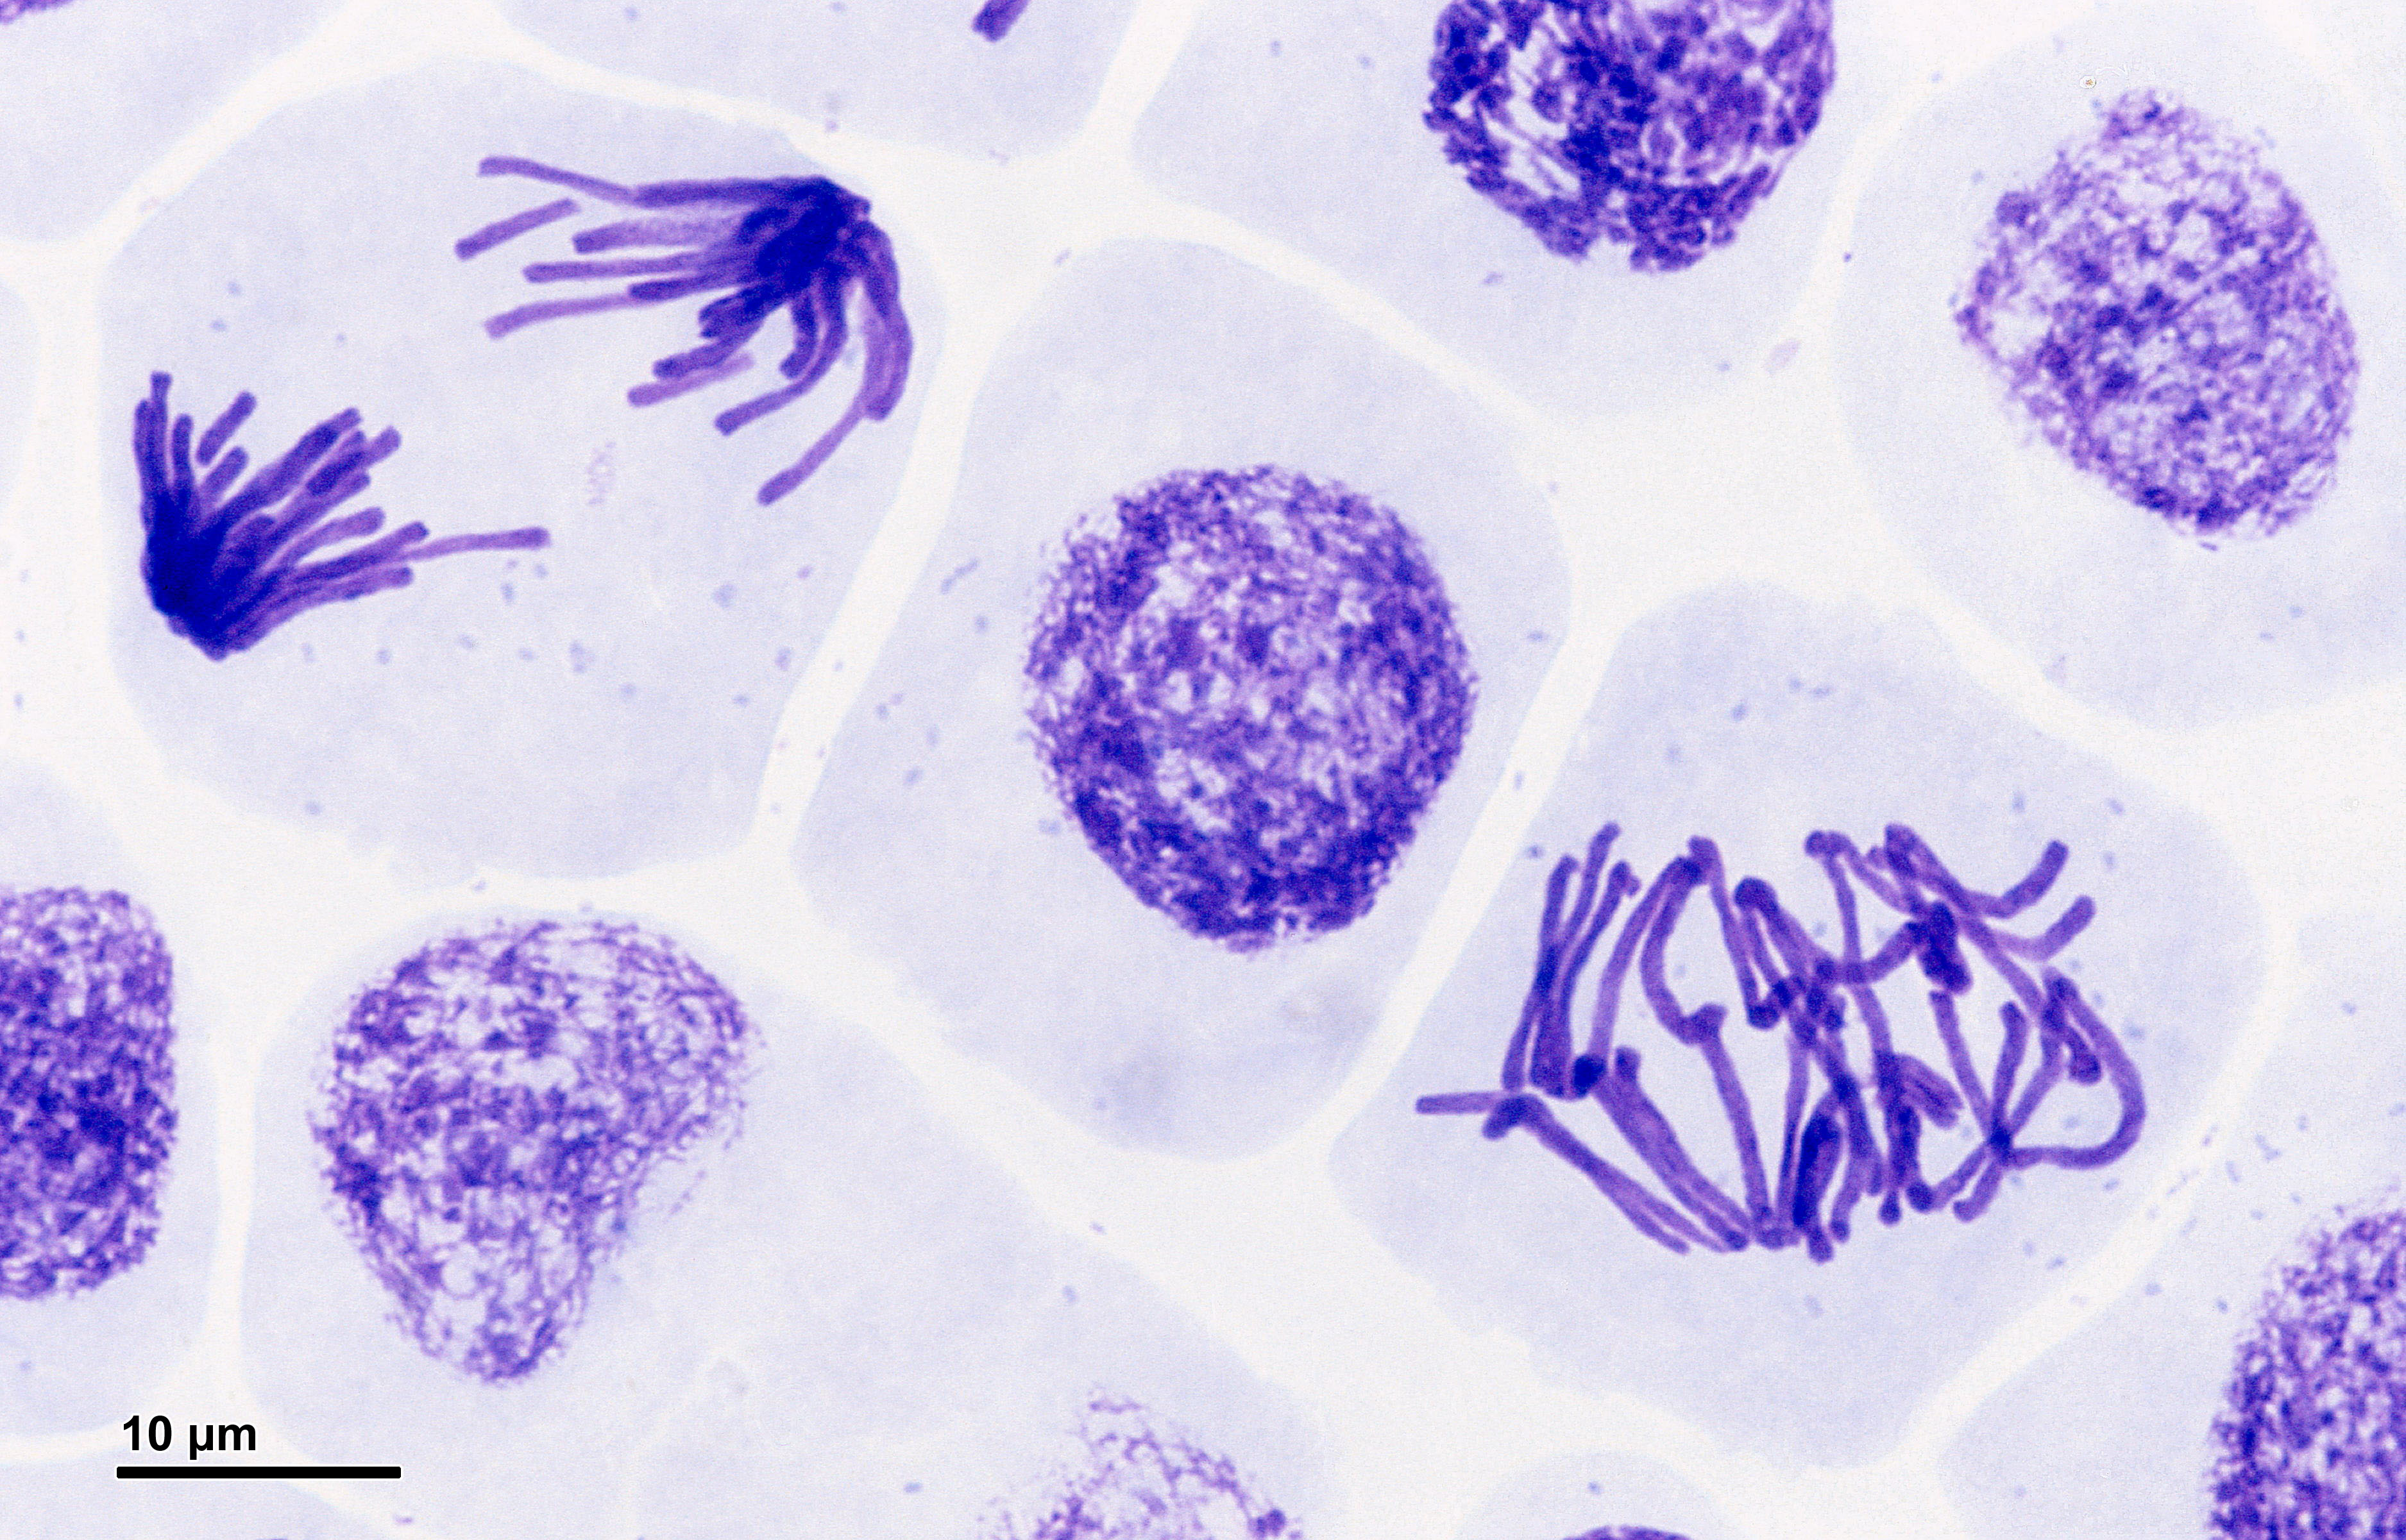 Microscope images of root cells in anaphase and prophase showing chromosomes stained purple